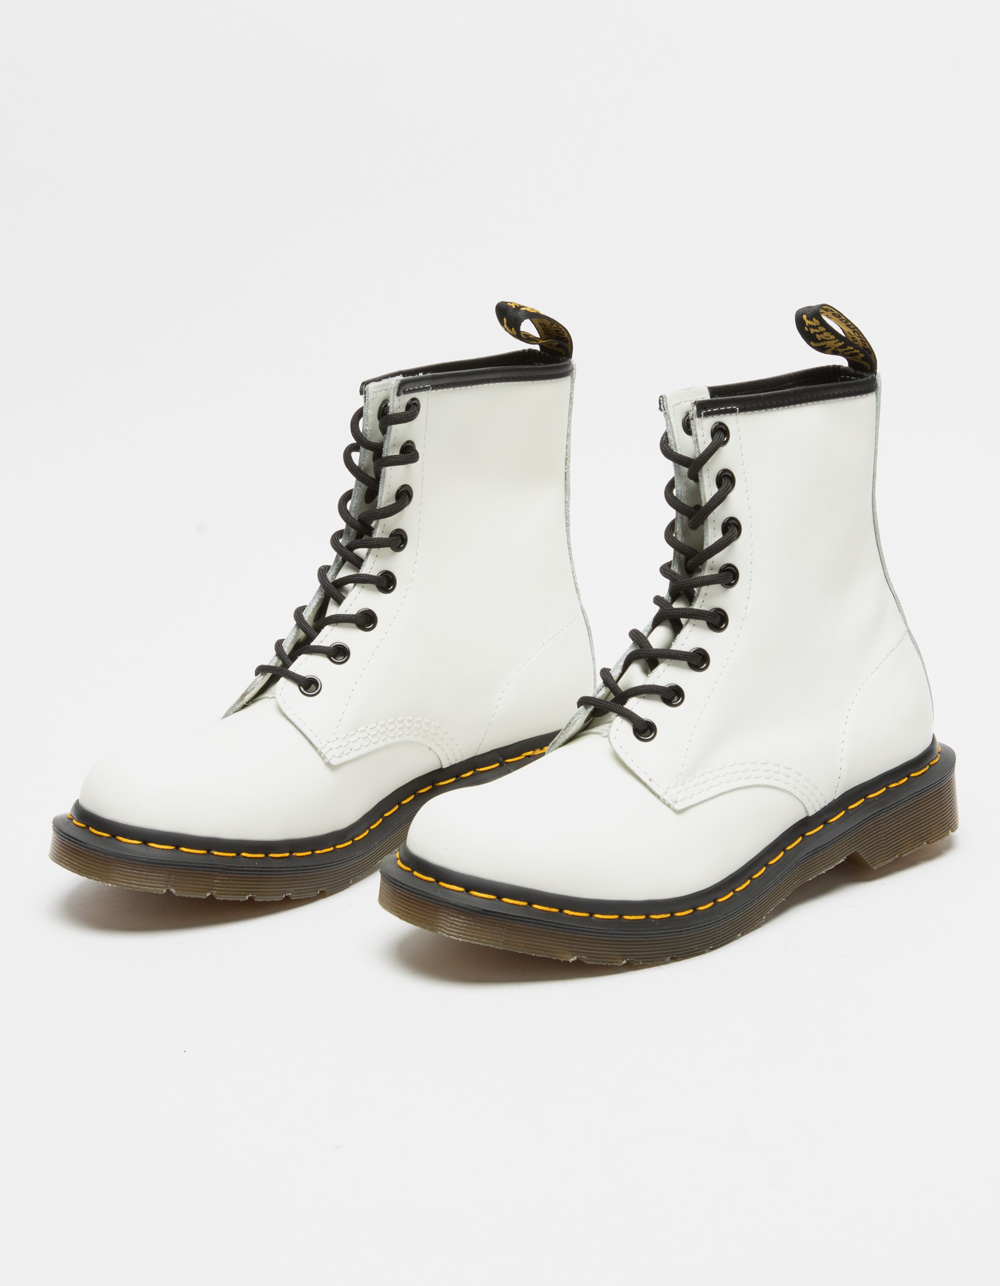 25 Best White doc martens ideas  white doc martens, white boots outfit, dr  martens outfit